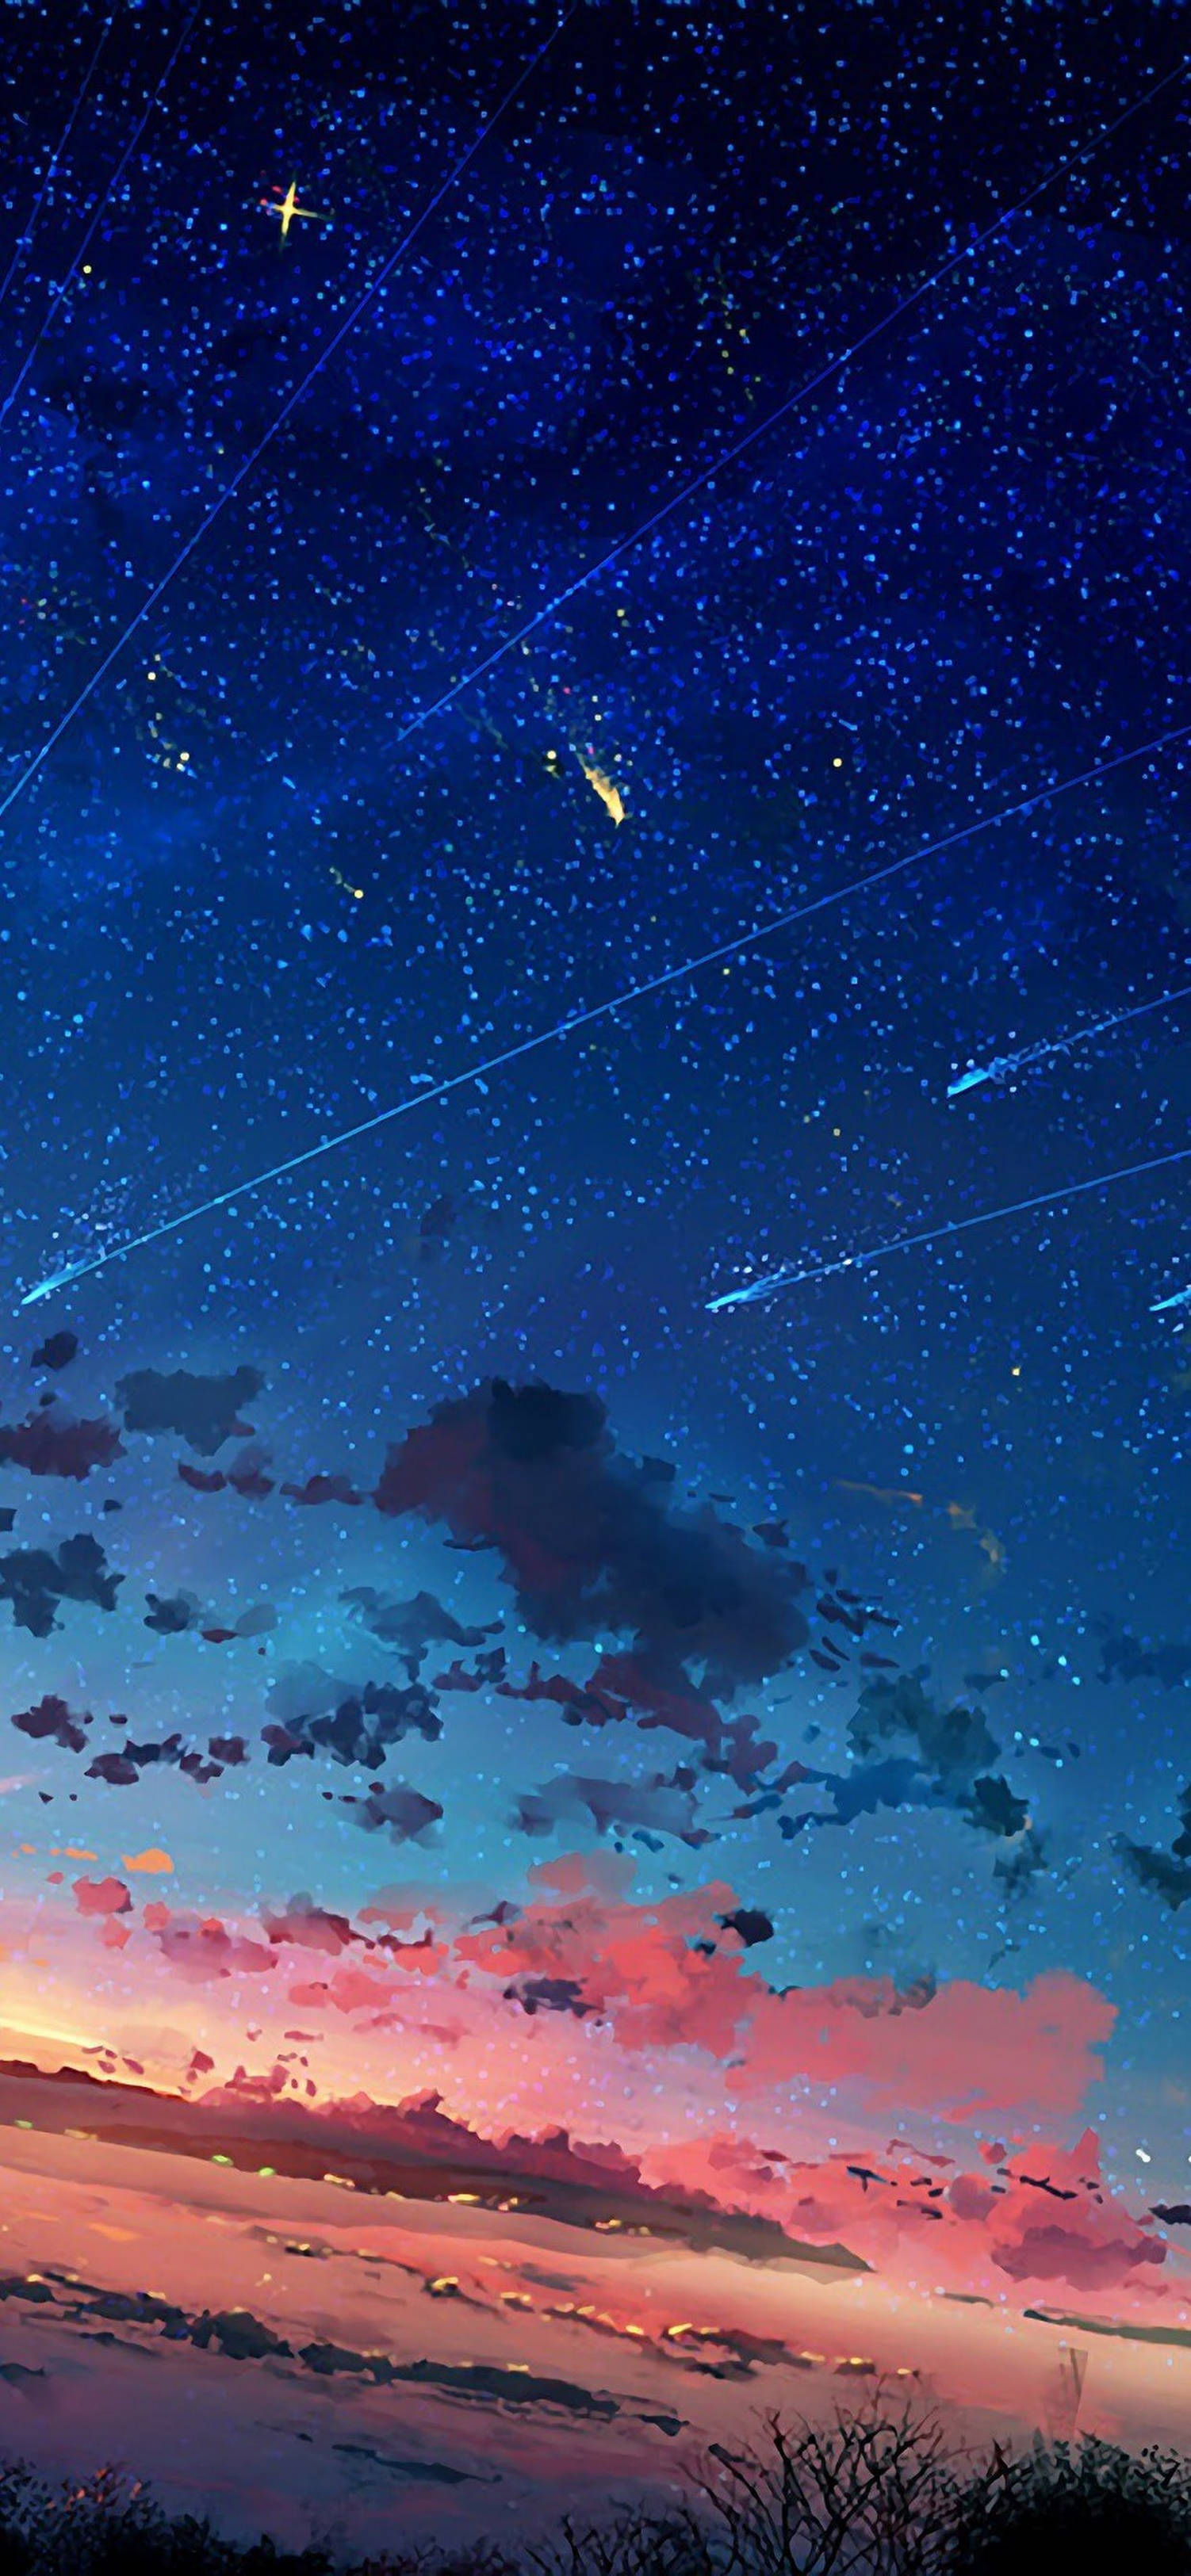 4k Anime Iphone Falling Stars And Comet Wallpaper